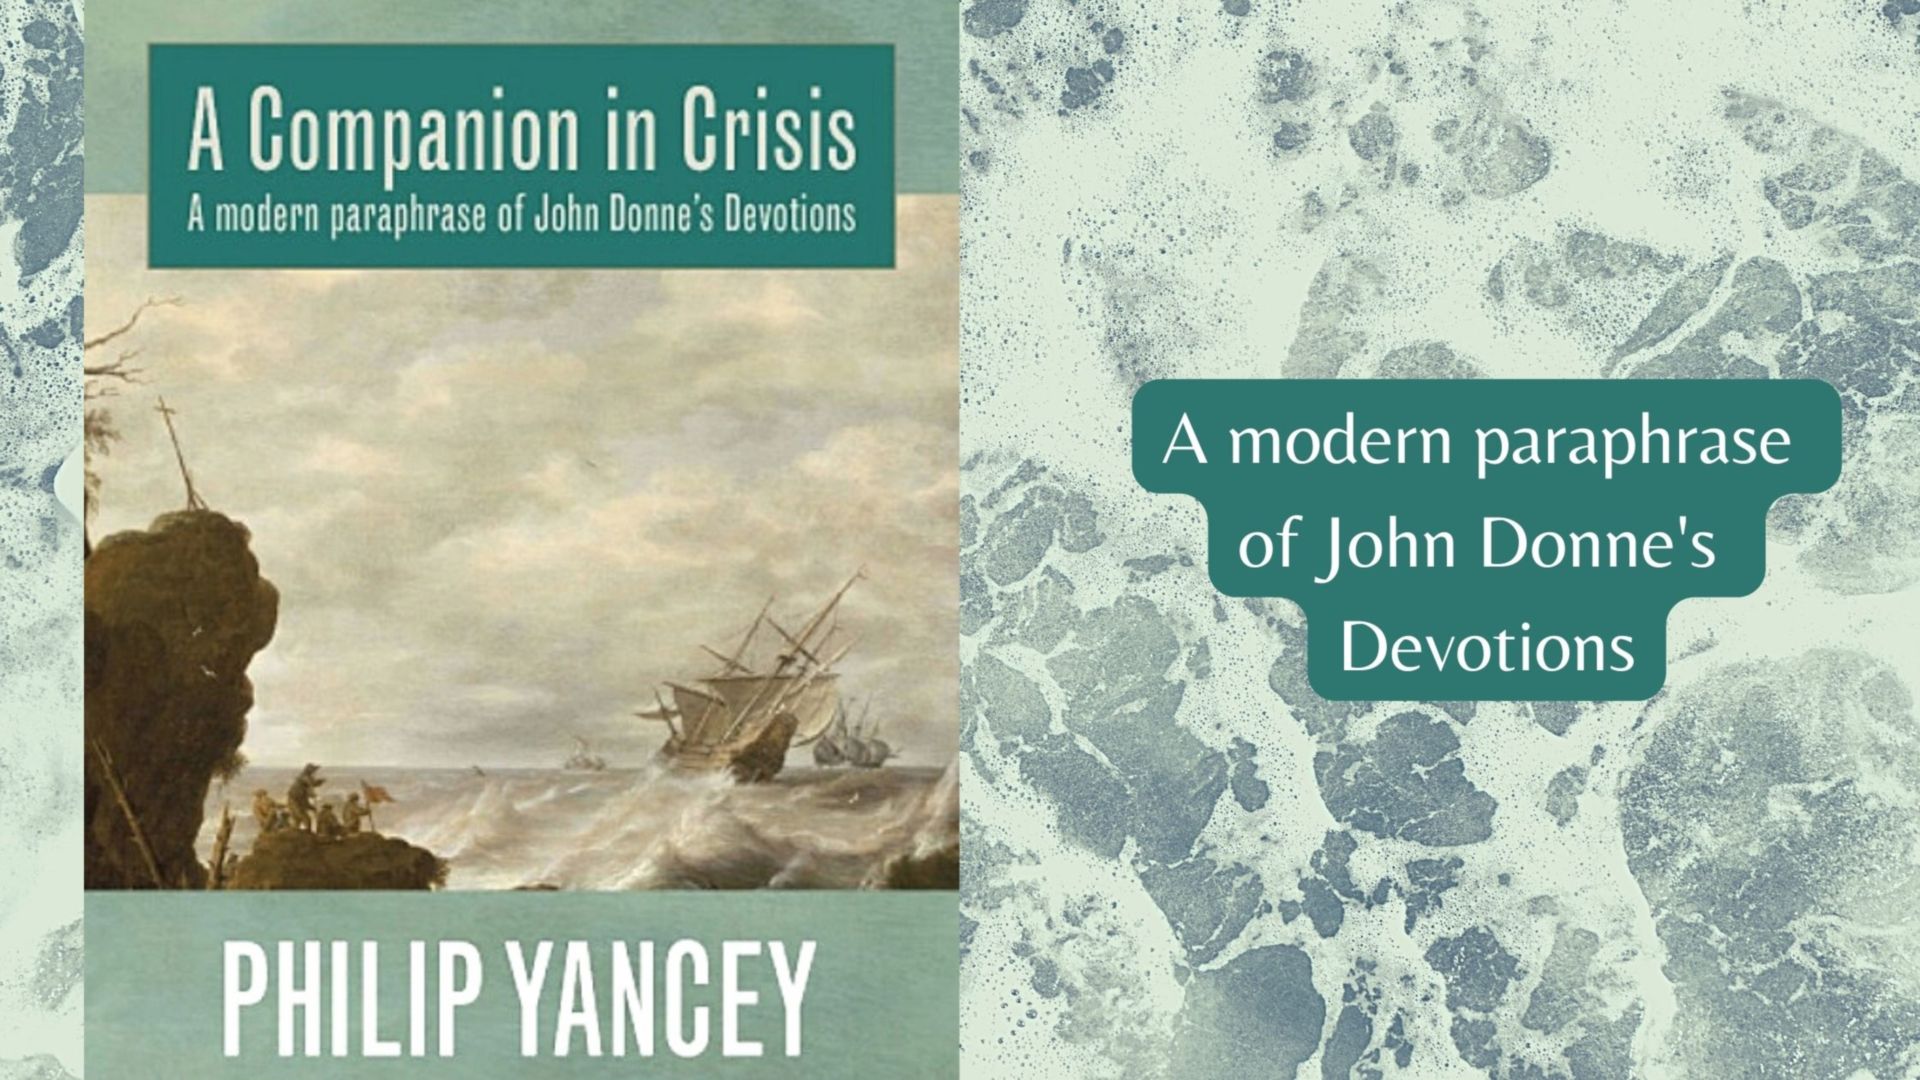 A review of the book 'A Companion in Crisis' by Philip Yancey